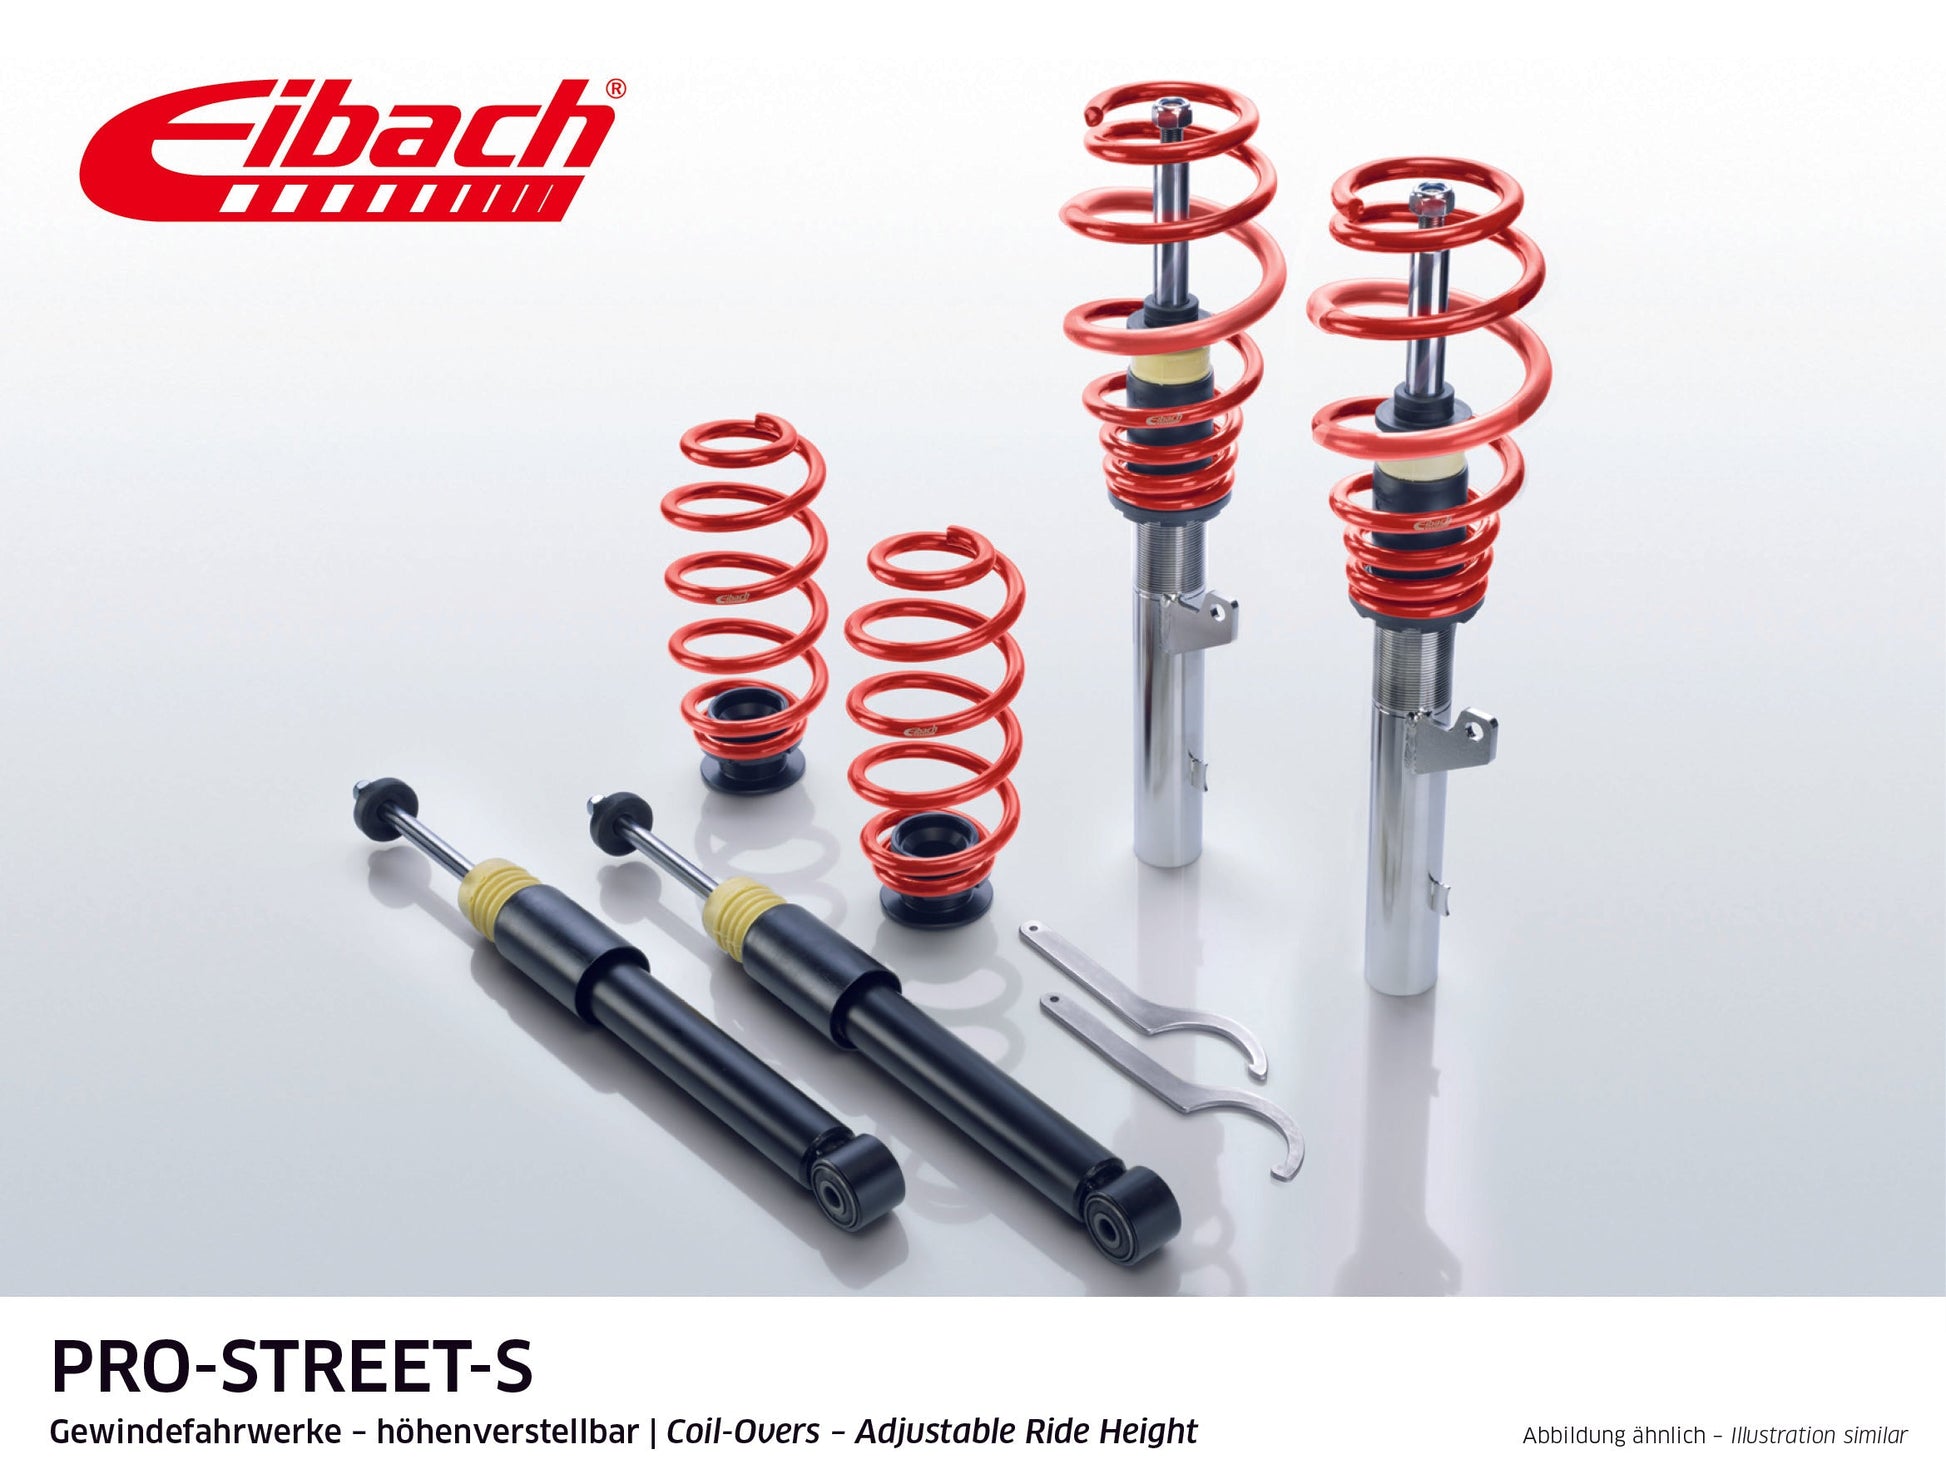 Eibach Pro-Street Coilover (PSS65-15-003-03-22) at £1045.57